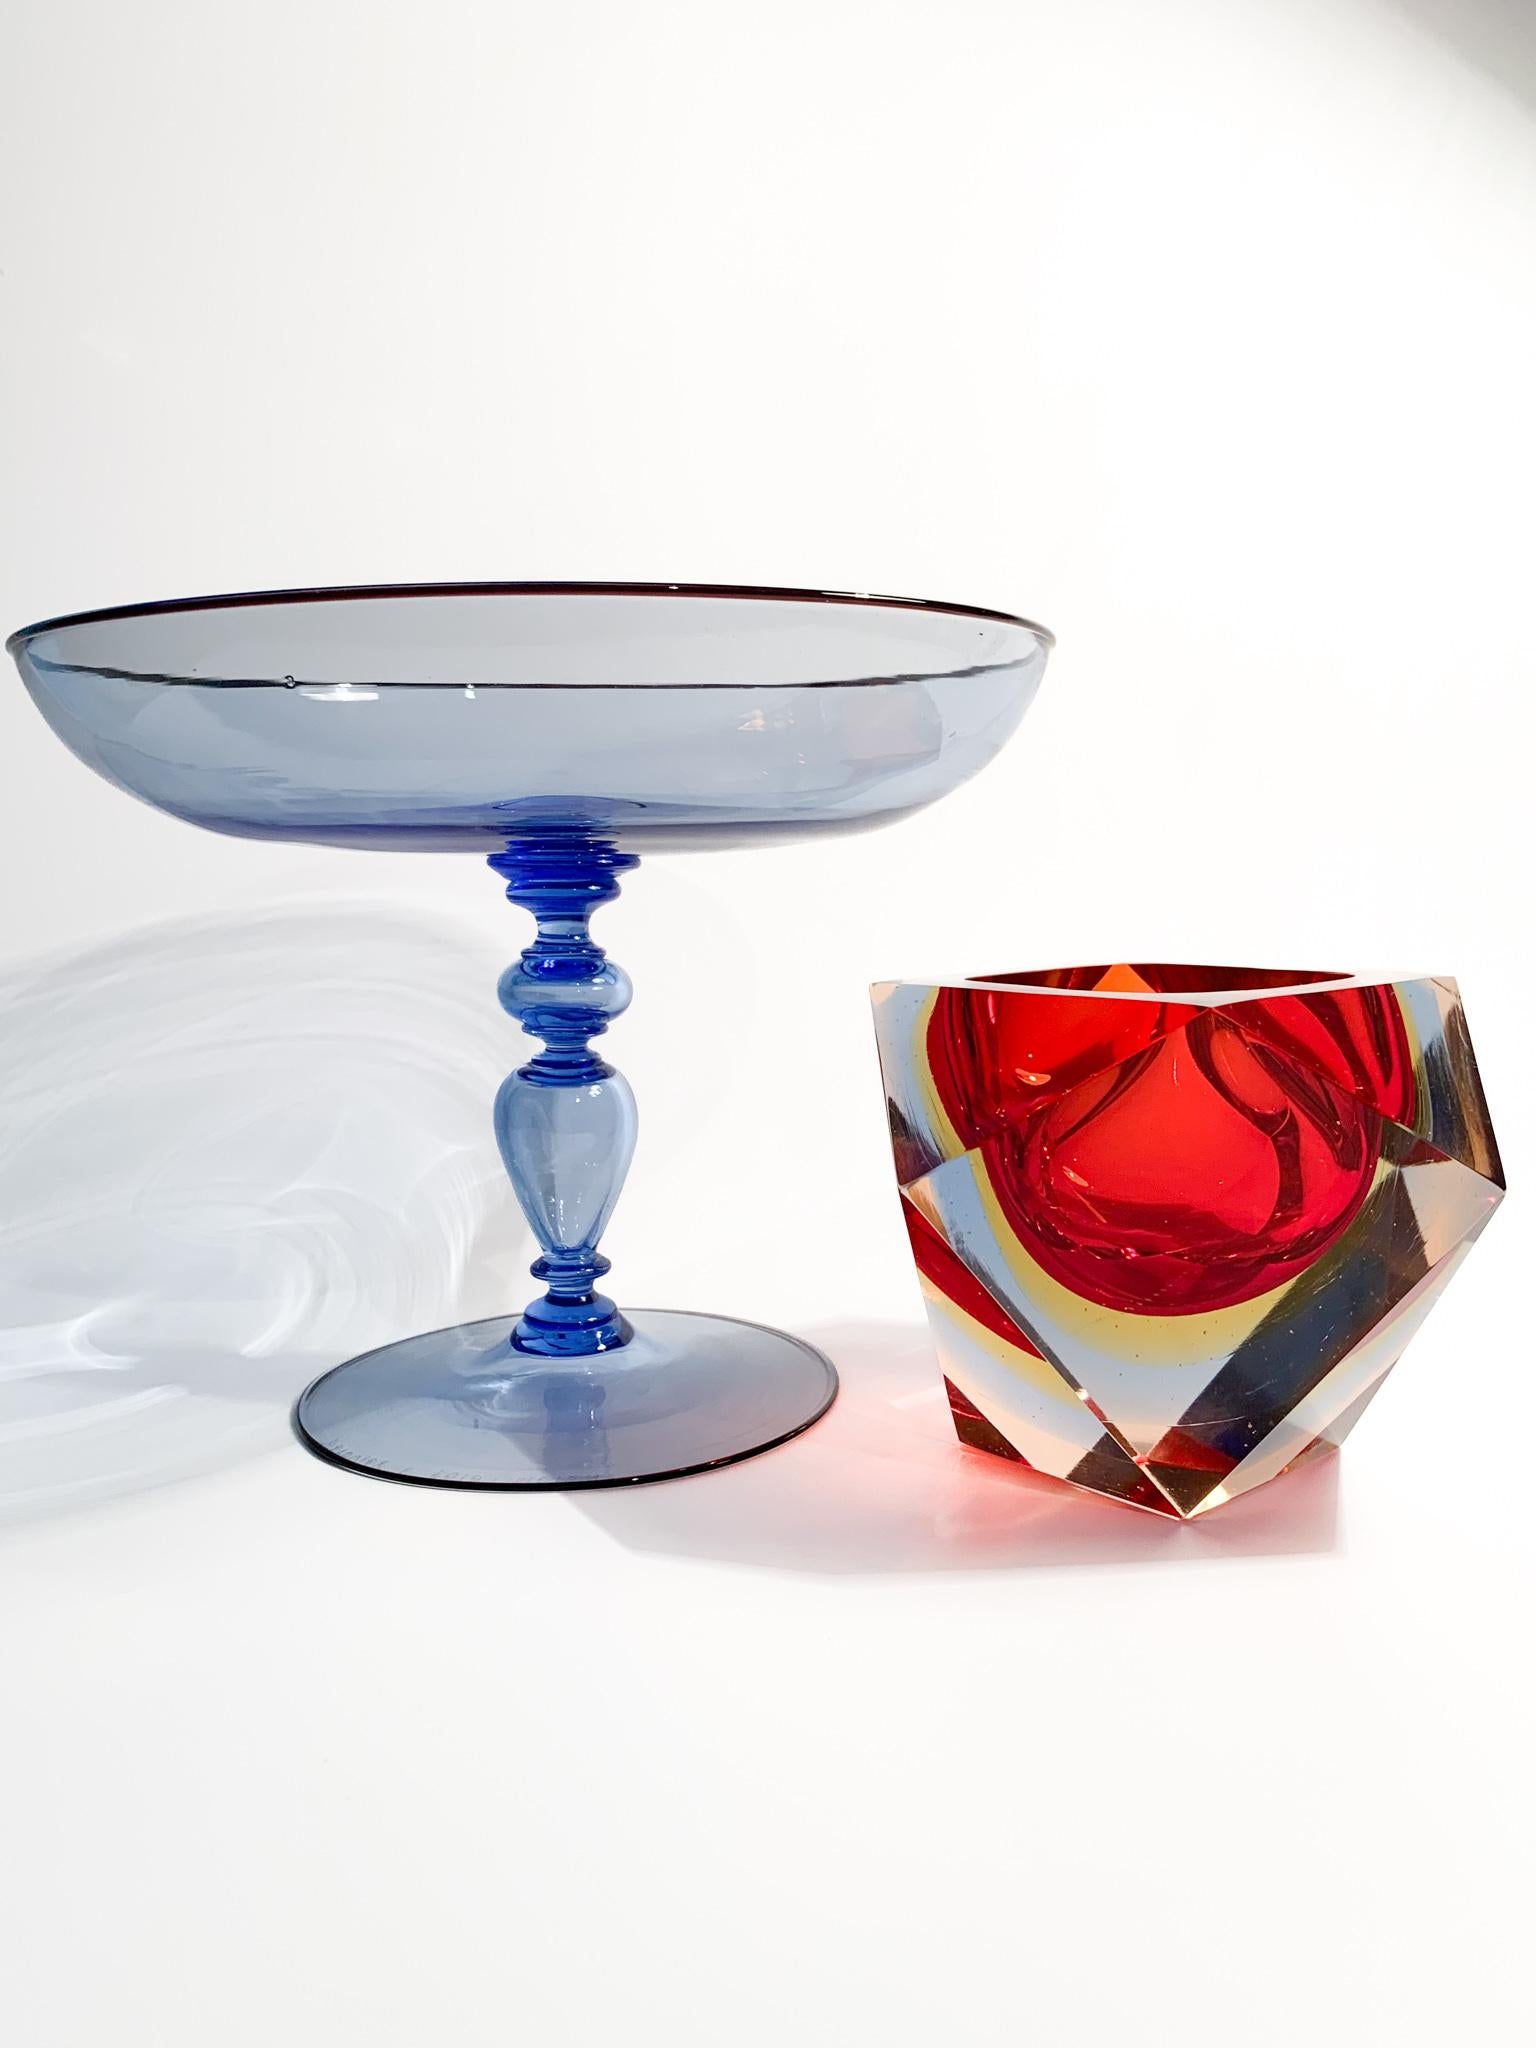 Late 20th Century Caravaggio Cup Murano Glass Centerpiece by Barovier & Toso from the 1980s For Sale